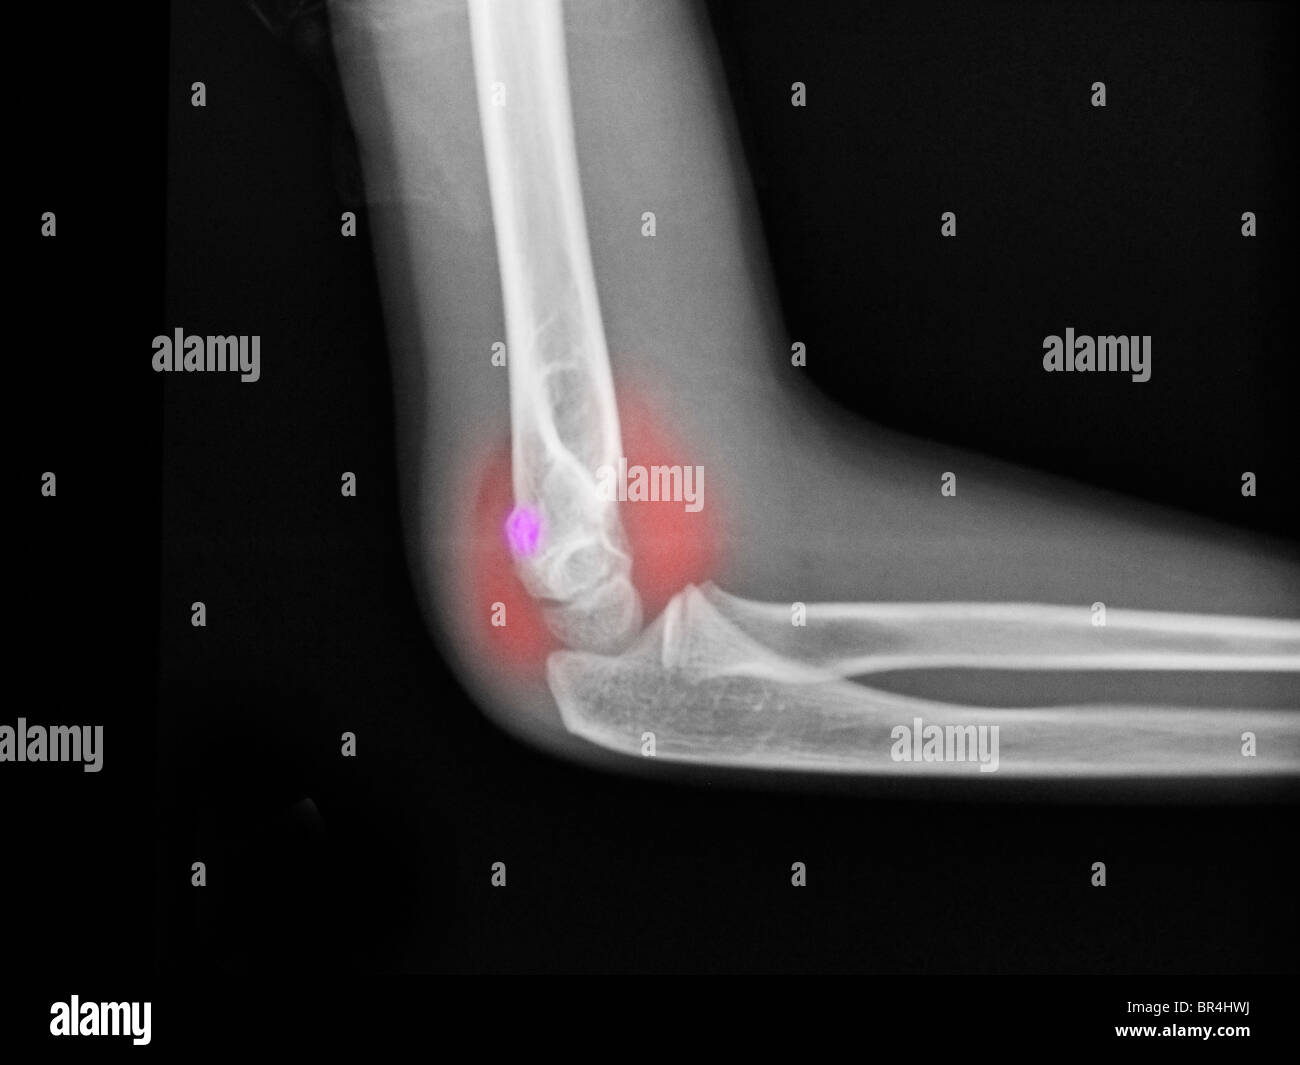 x-ray showing a distal humerus fracture in a 7 year old boy. Stock Photo